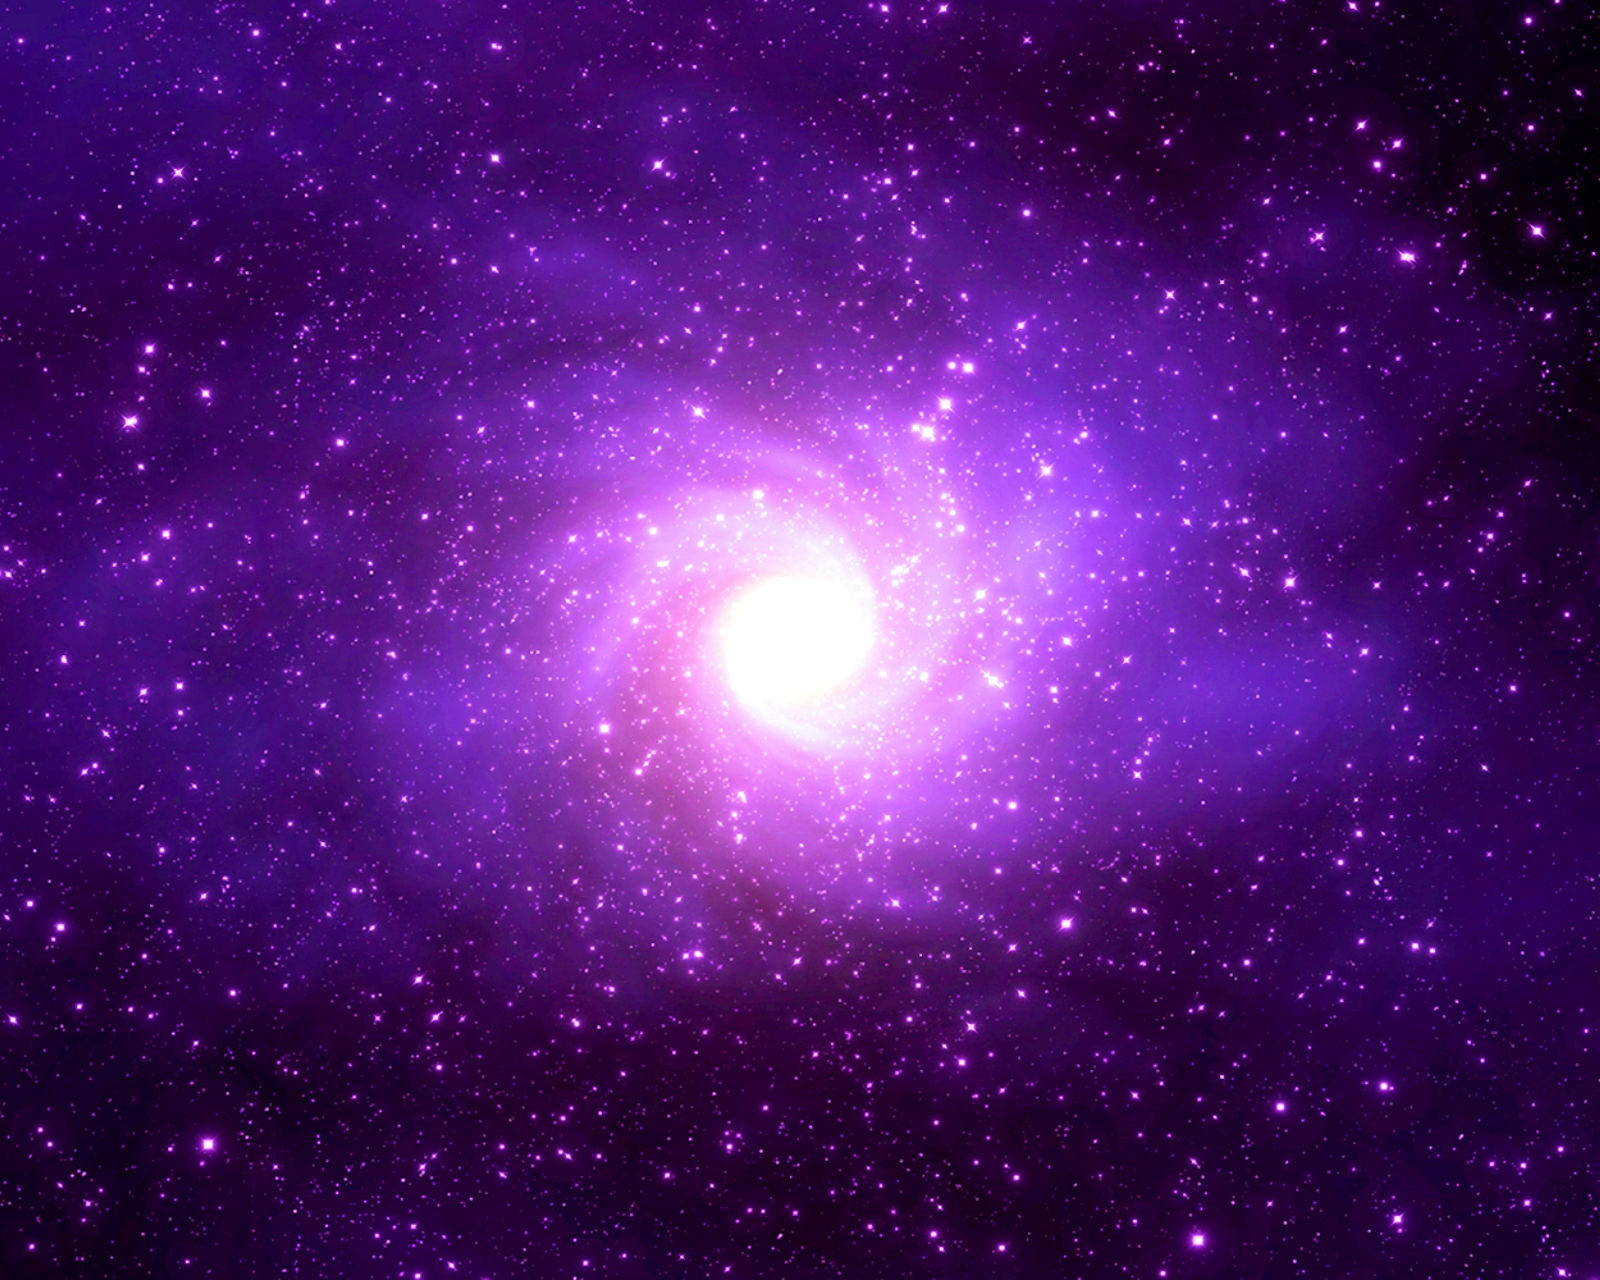 Purple Galaxies Wallpaper Pics About Space